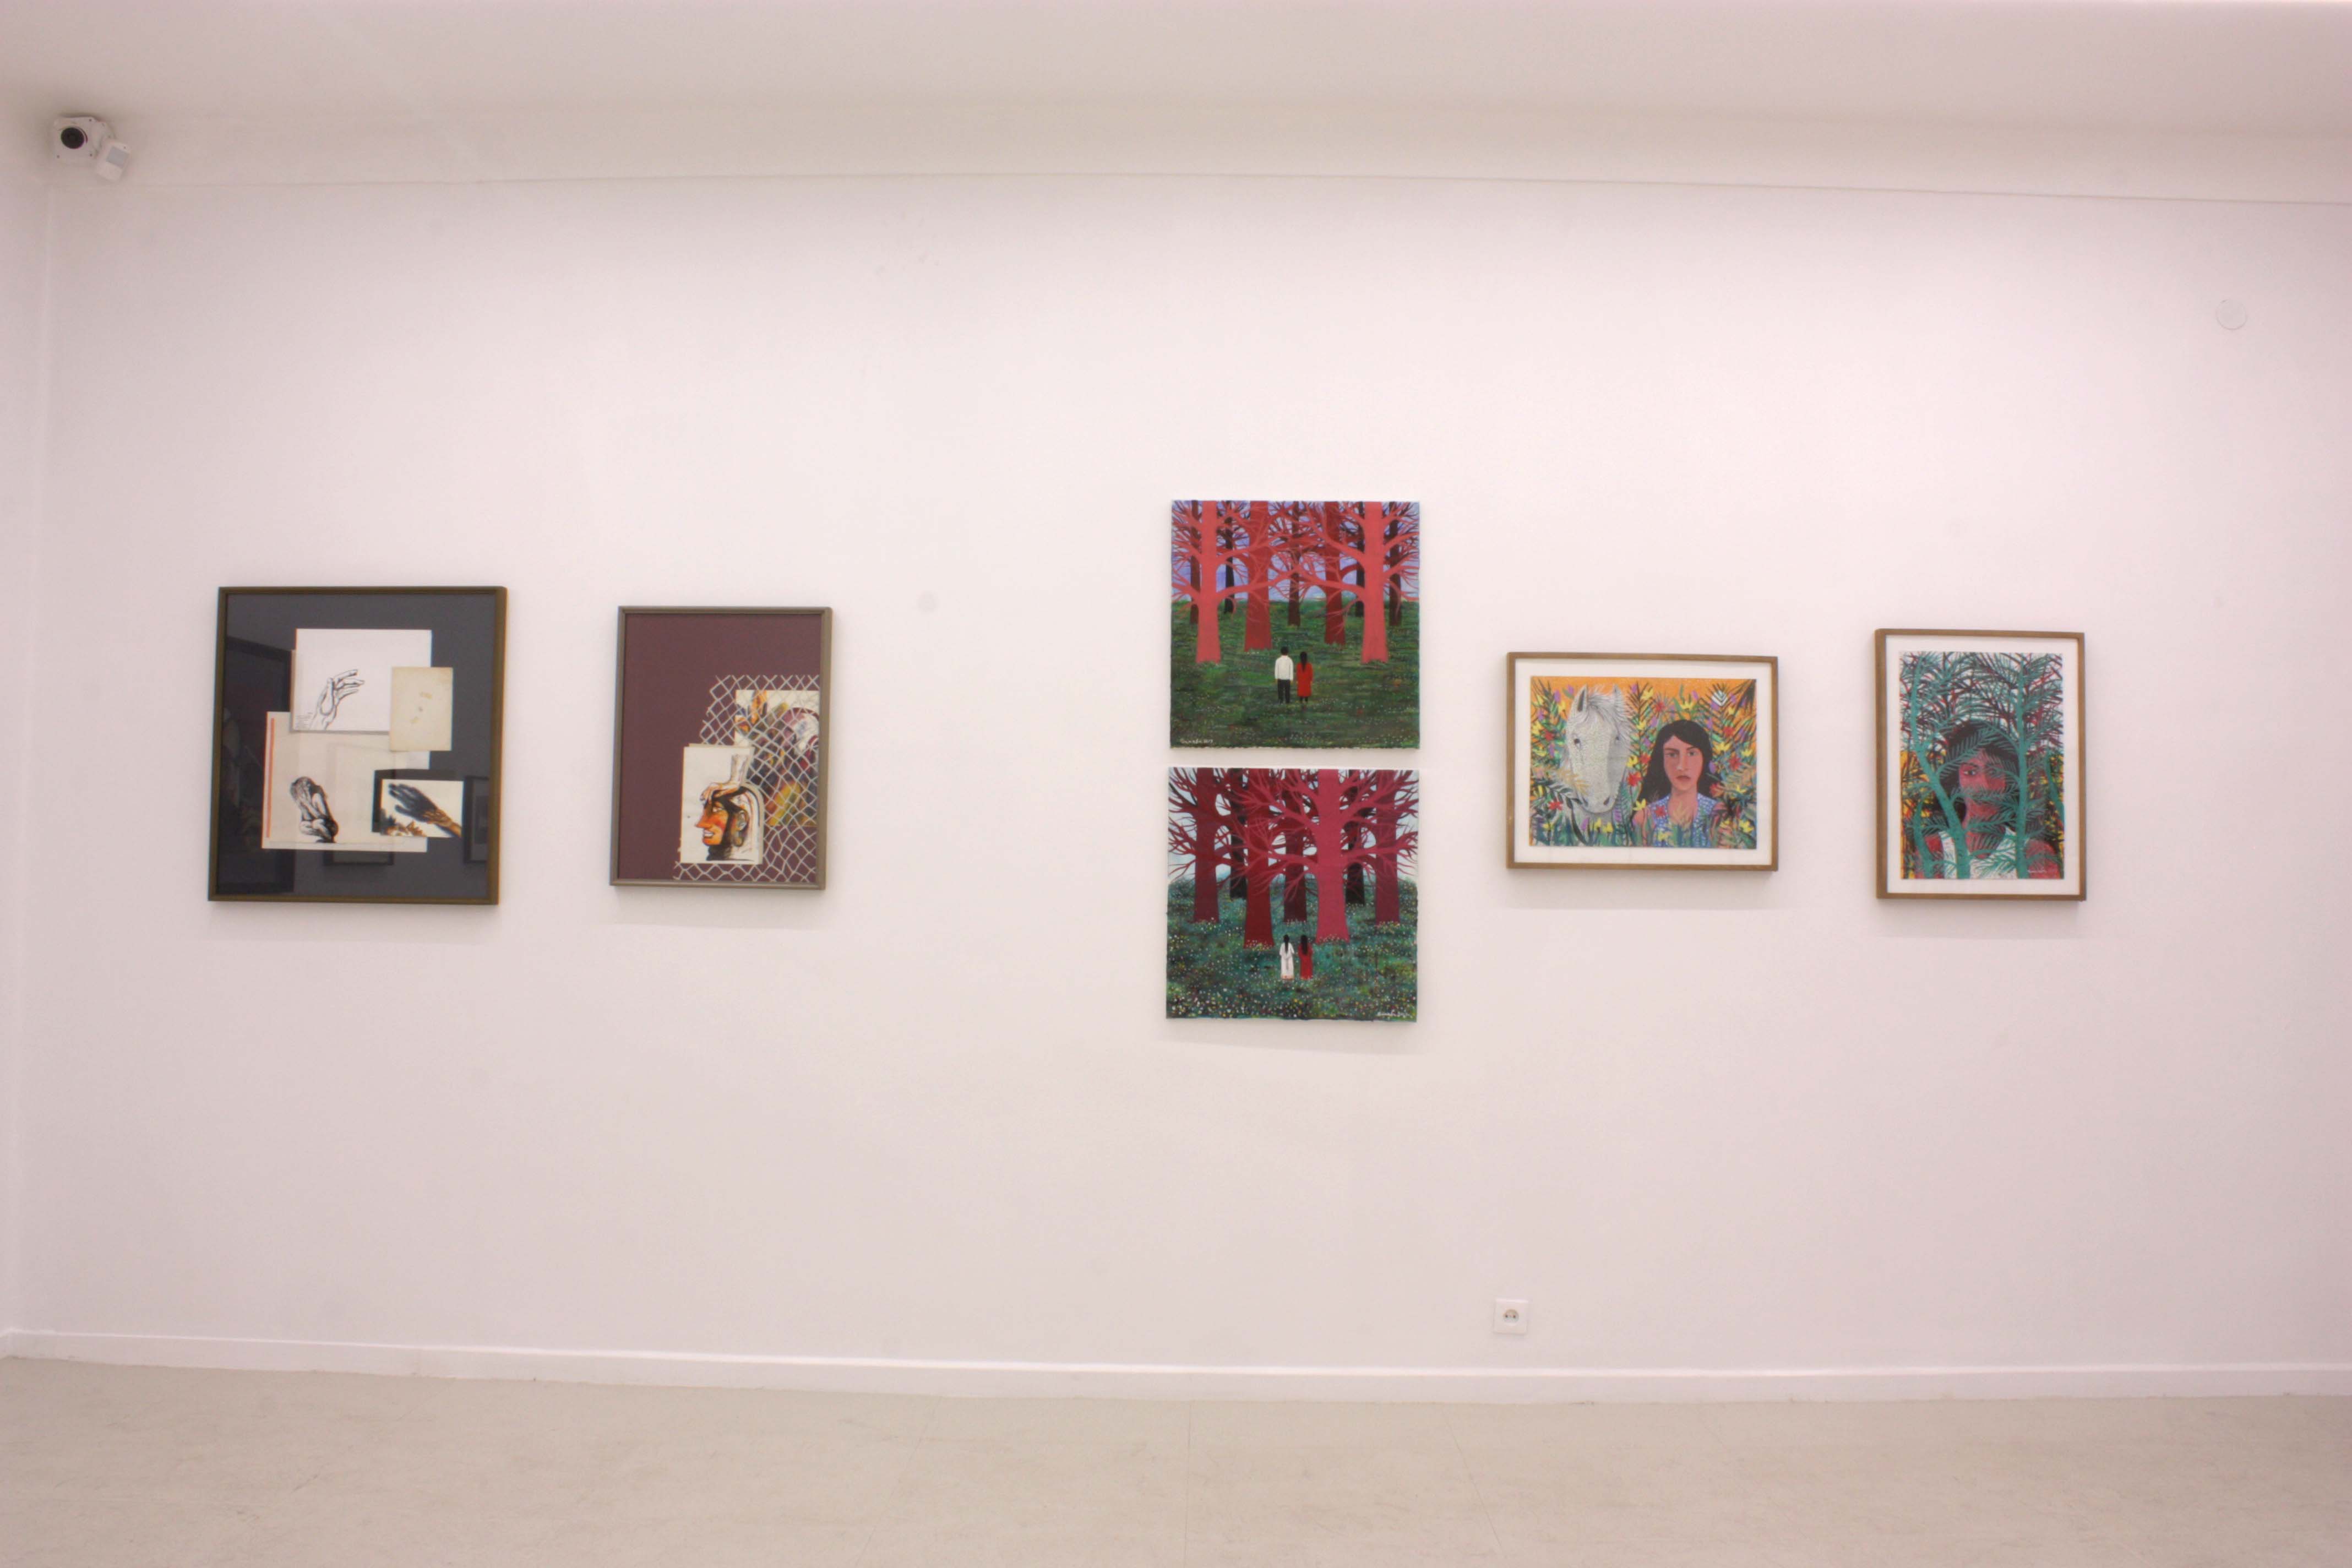 Installation view .Approaching The End Of Magic, The Plateau Closes in